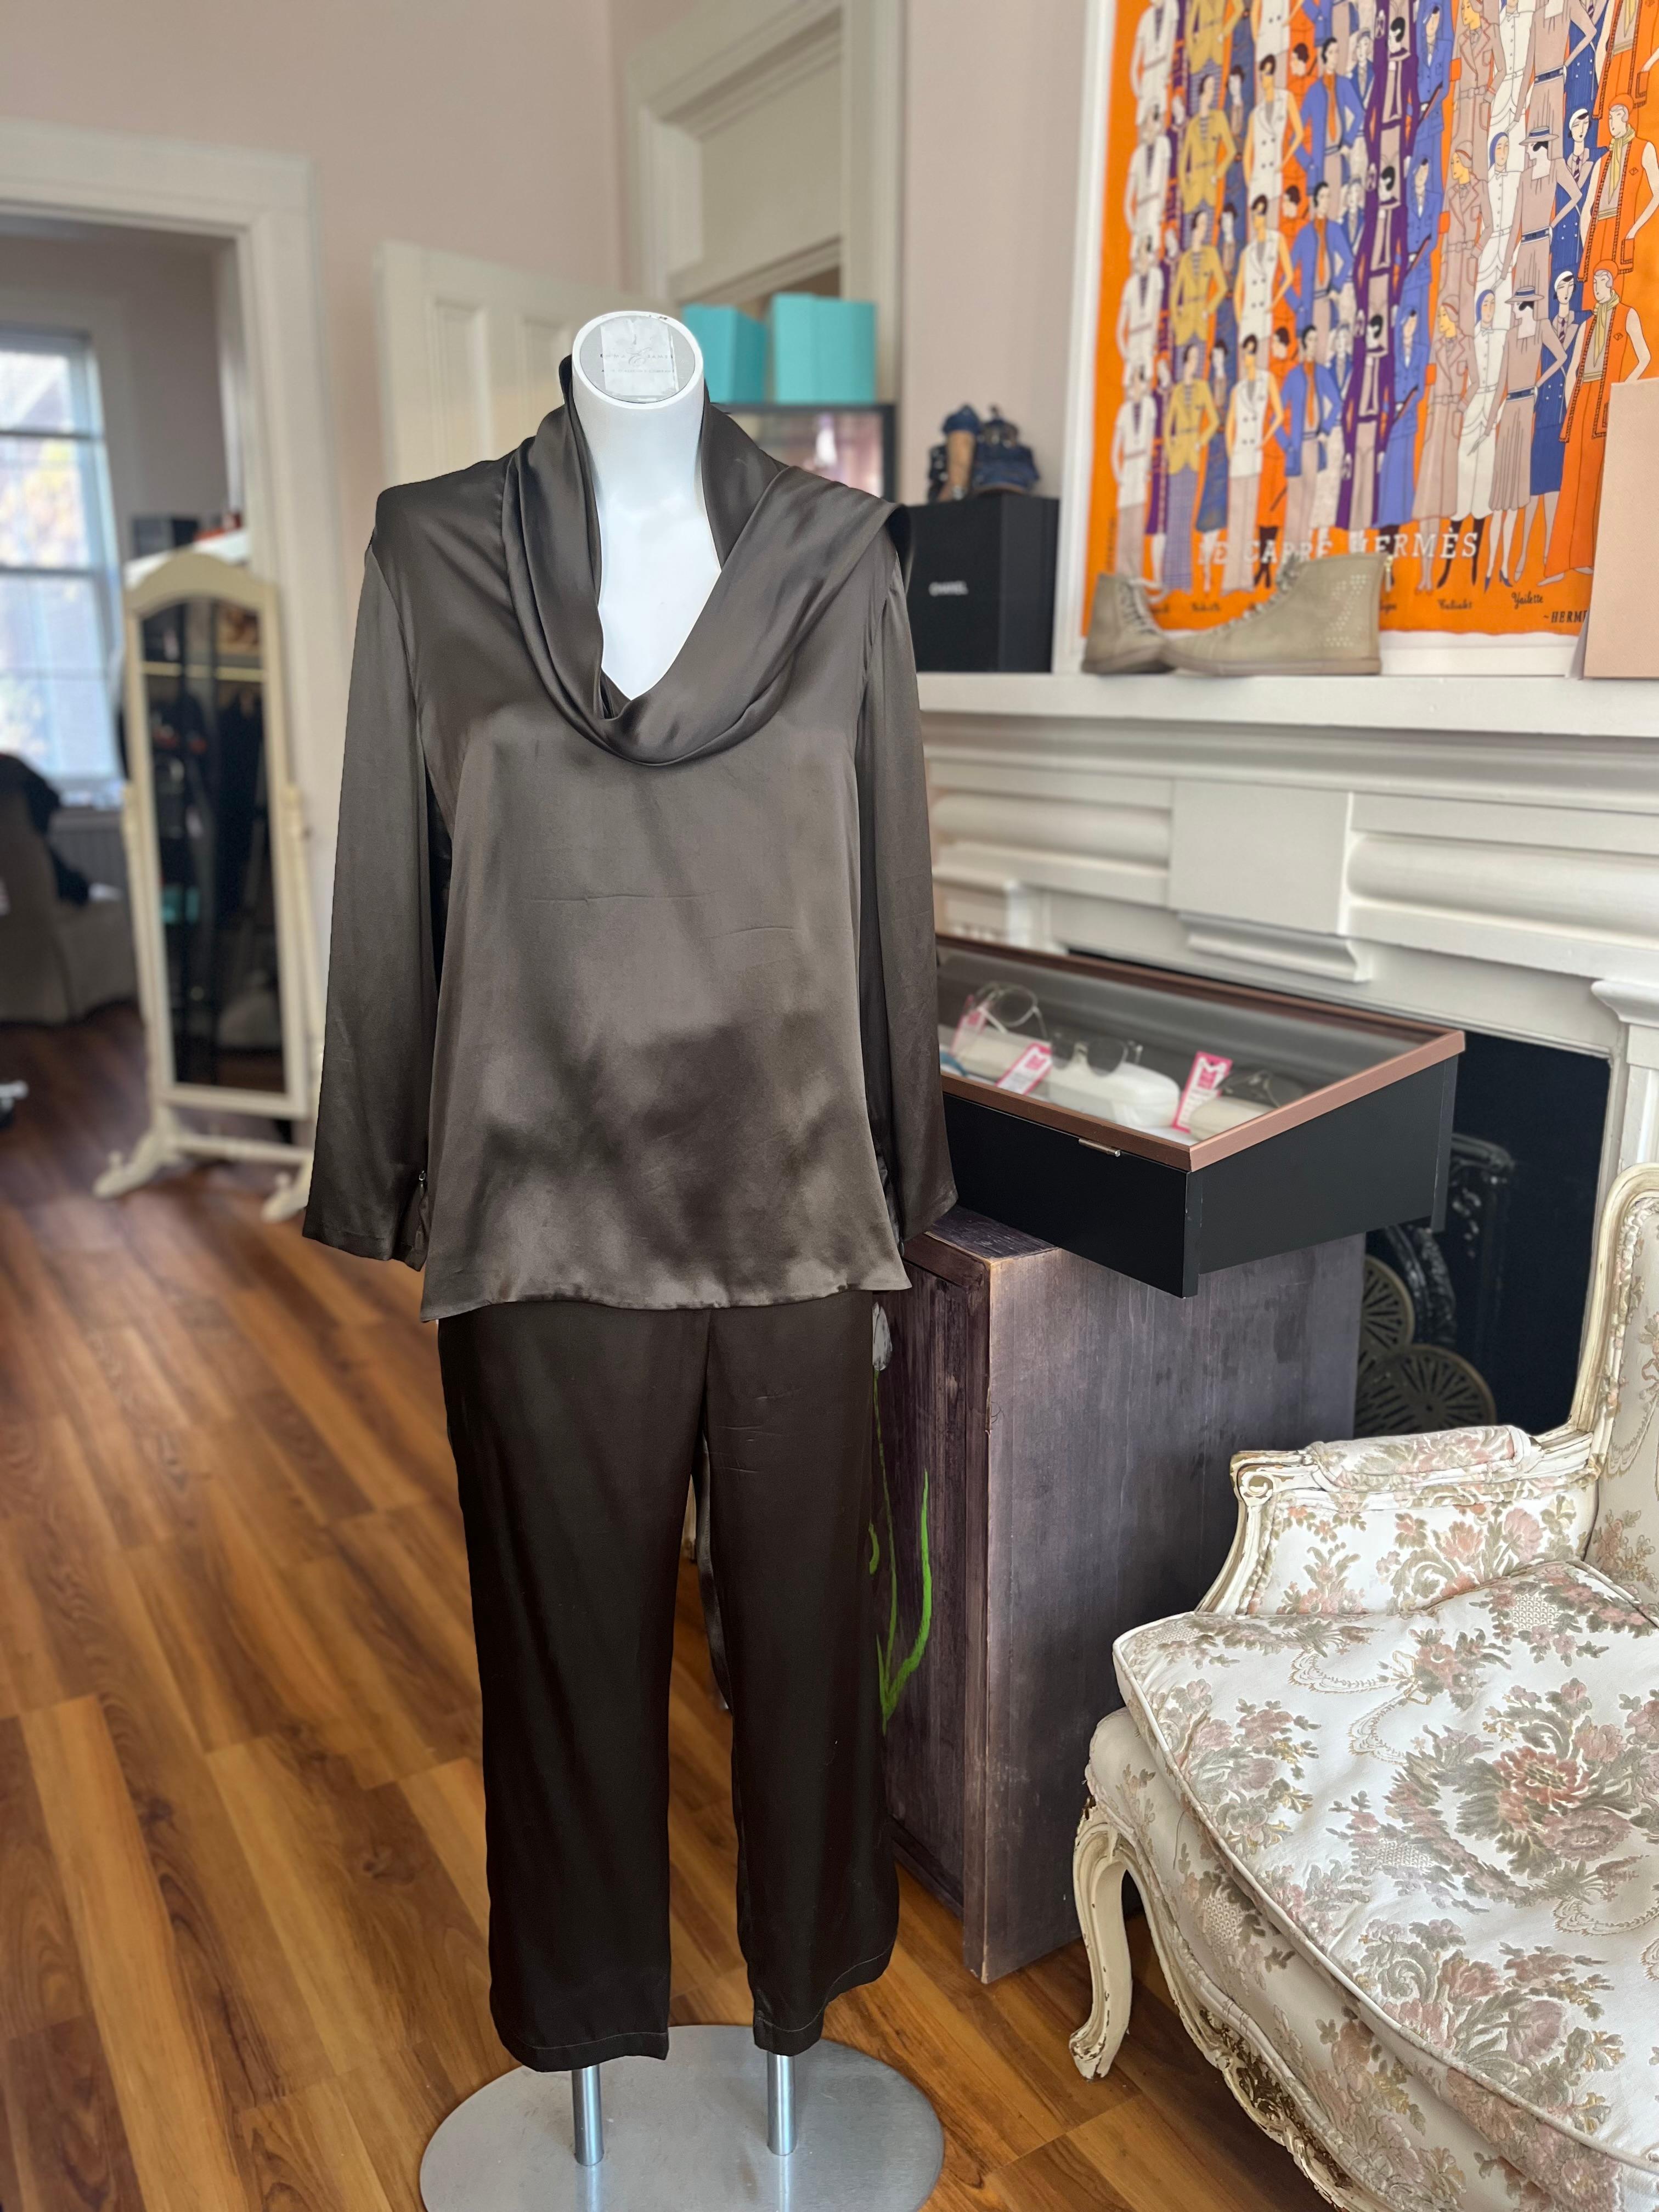 Made in Italy and designed by Tom Ford, this piece is made of silk in a bronze color. It is both fashionable and very comfortable.
The pants have an elastic waist, two back pockets, and eye and hook and zip front centre closure.

The top has a